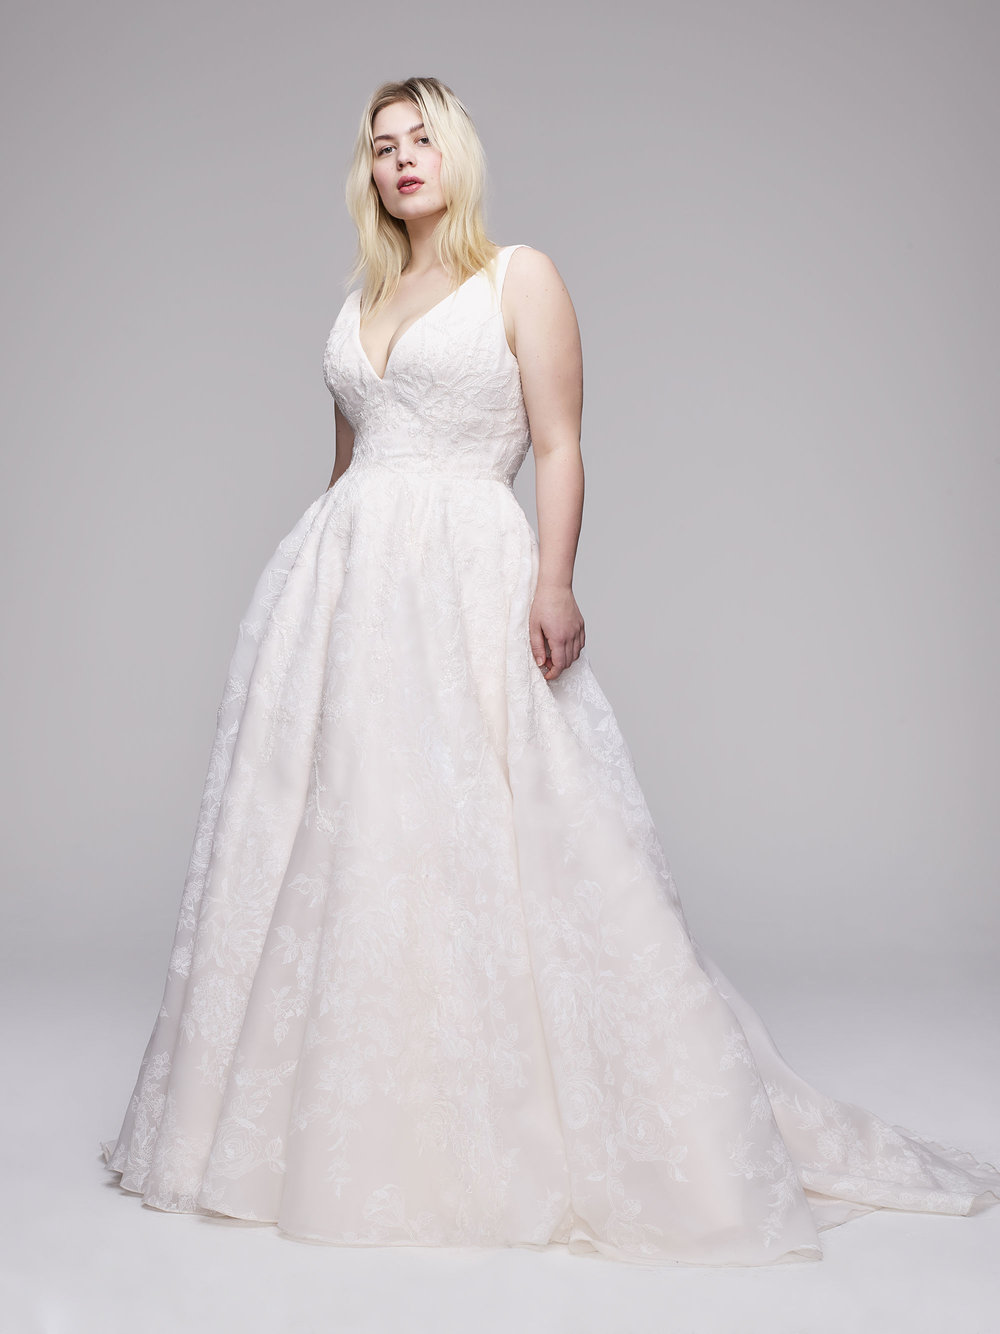 The Lupita Plus Size Wedding Gown from Curve Couture by Anne Barge